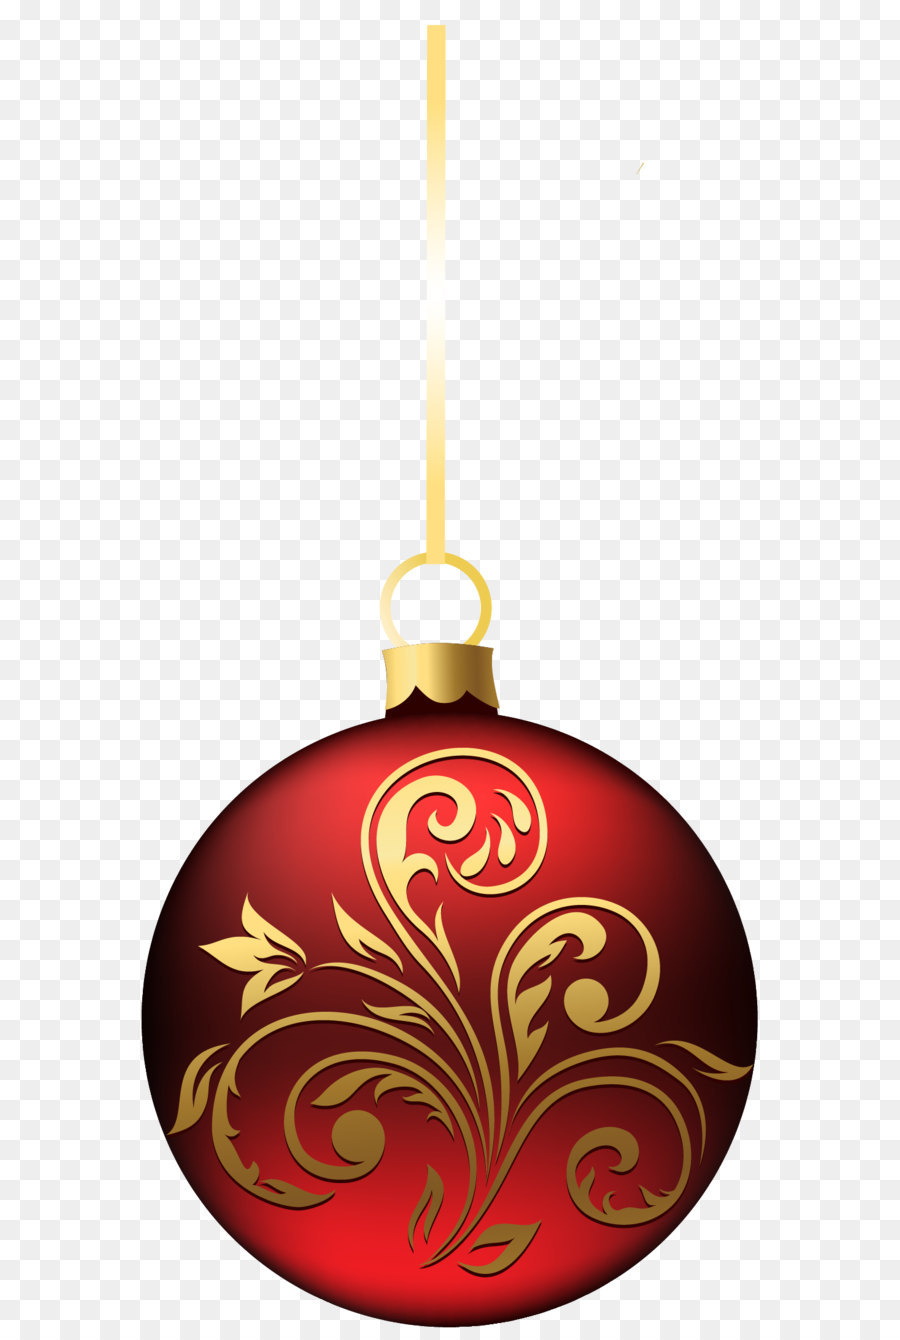 Free Christmas Ornaments Png Transparent, Download Free Christmas 